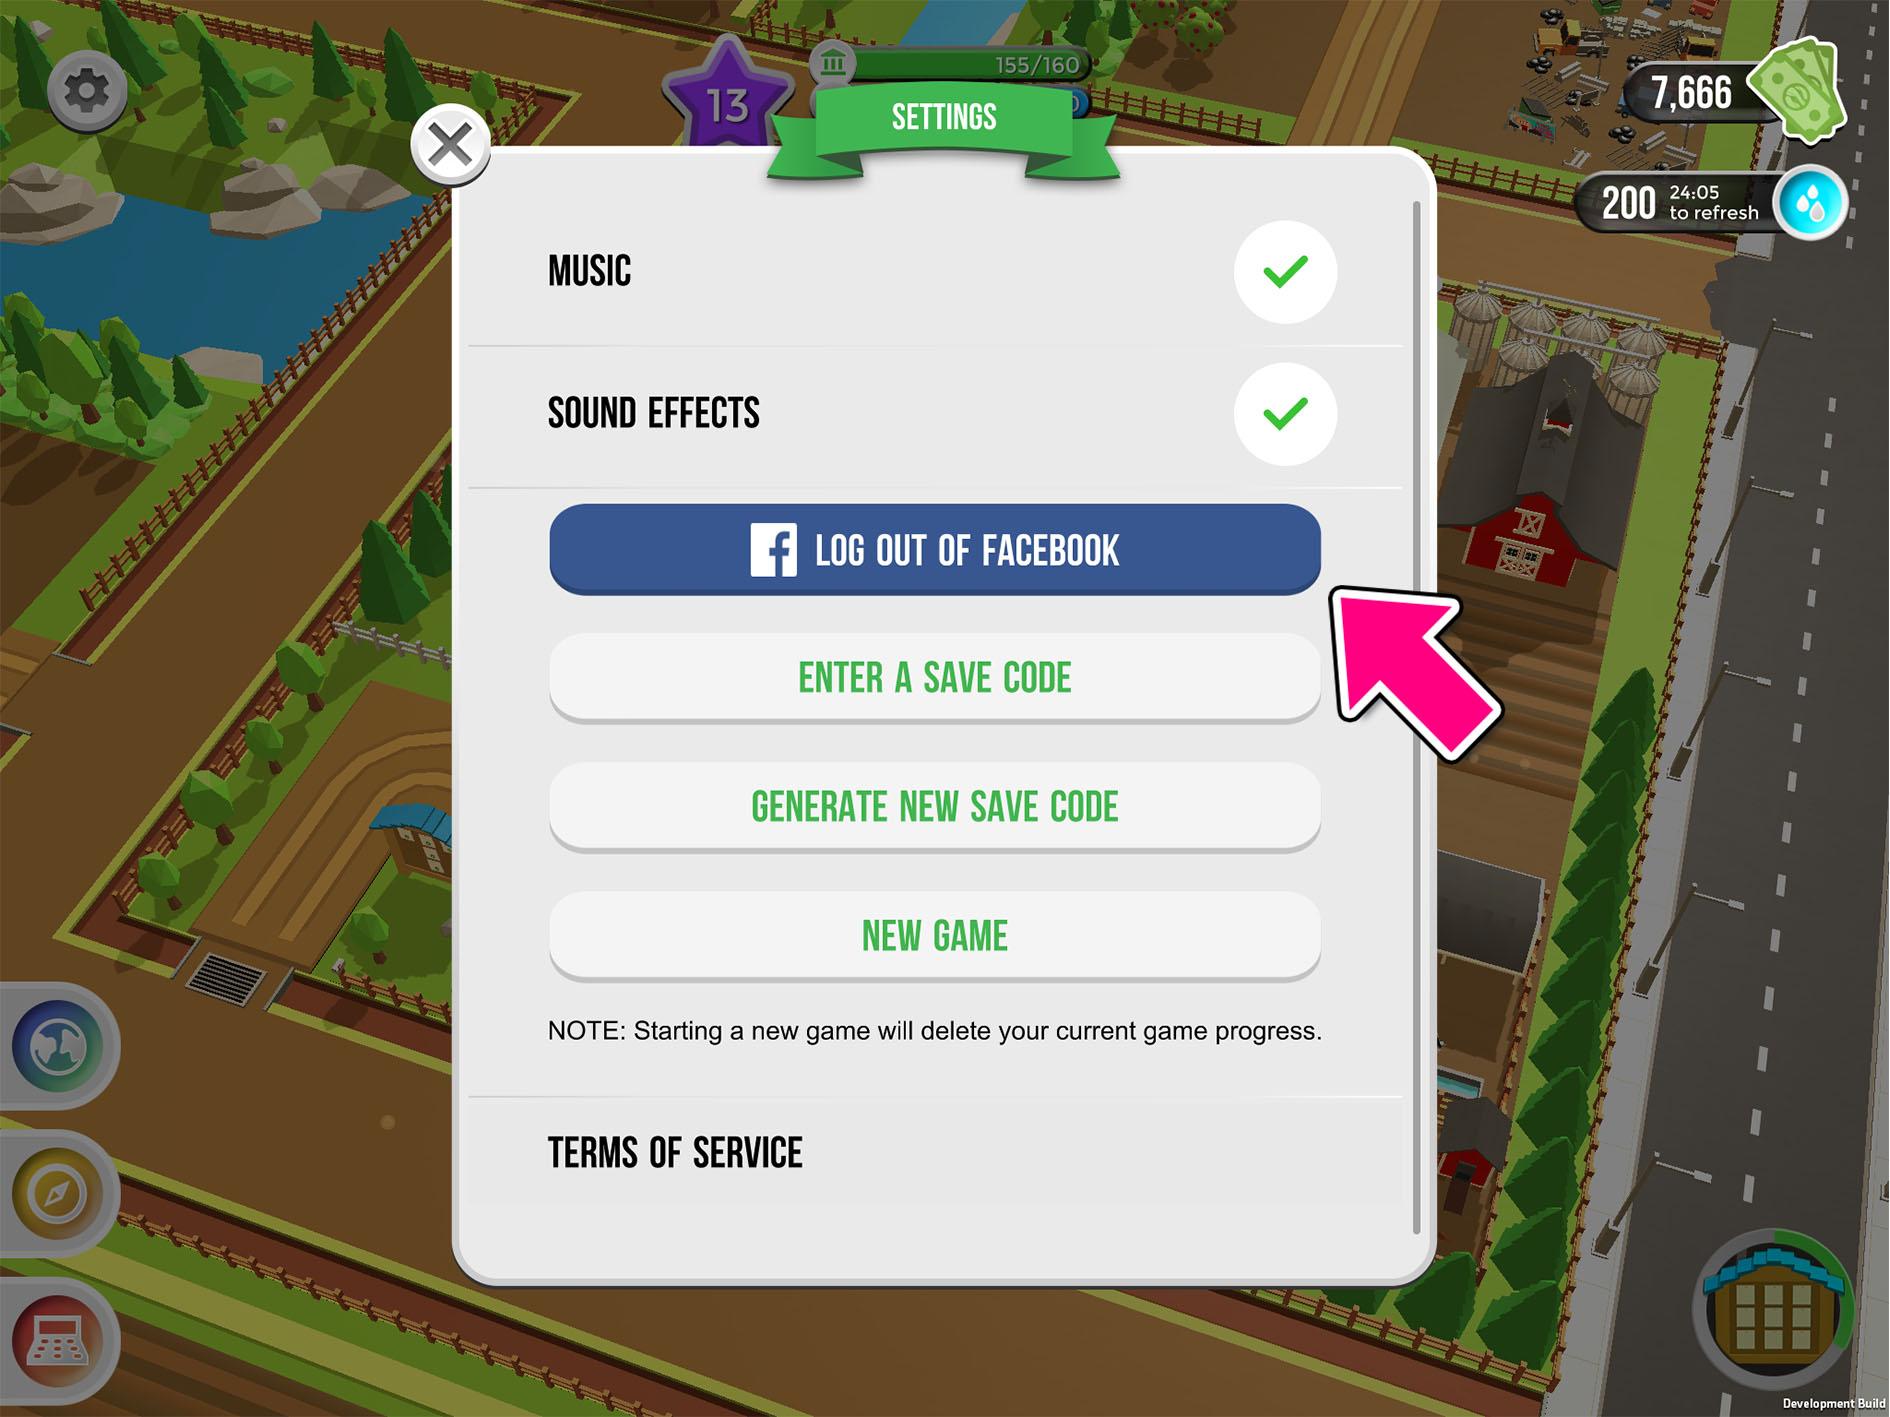 Log out of using Facebook App on Free Farmers game 